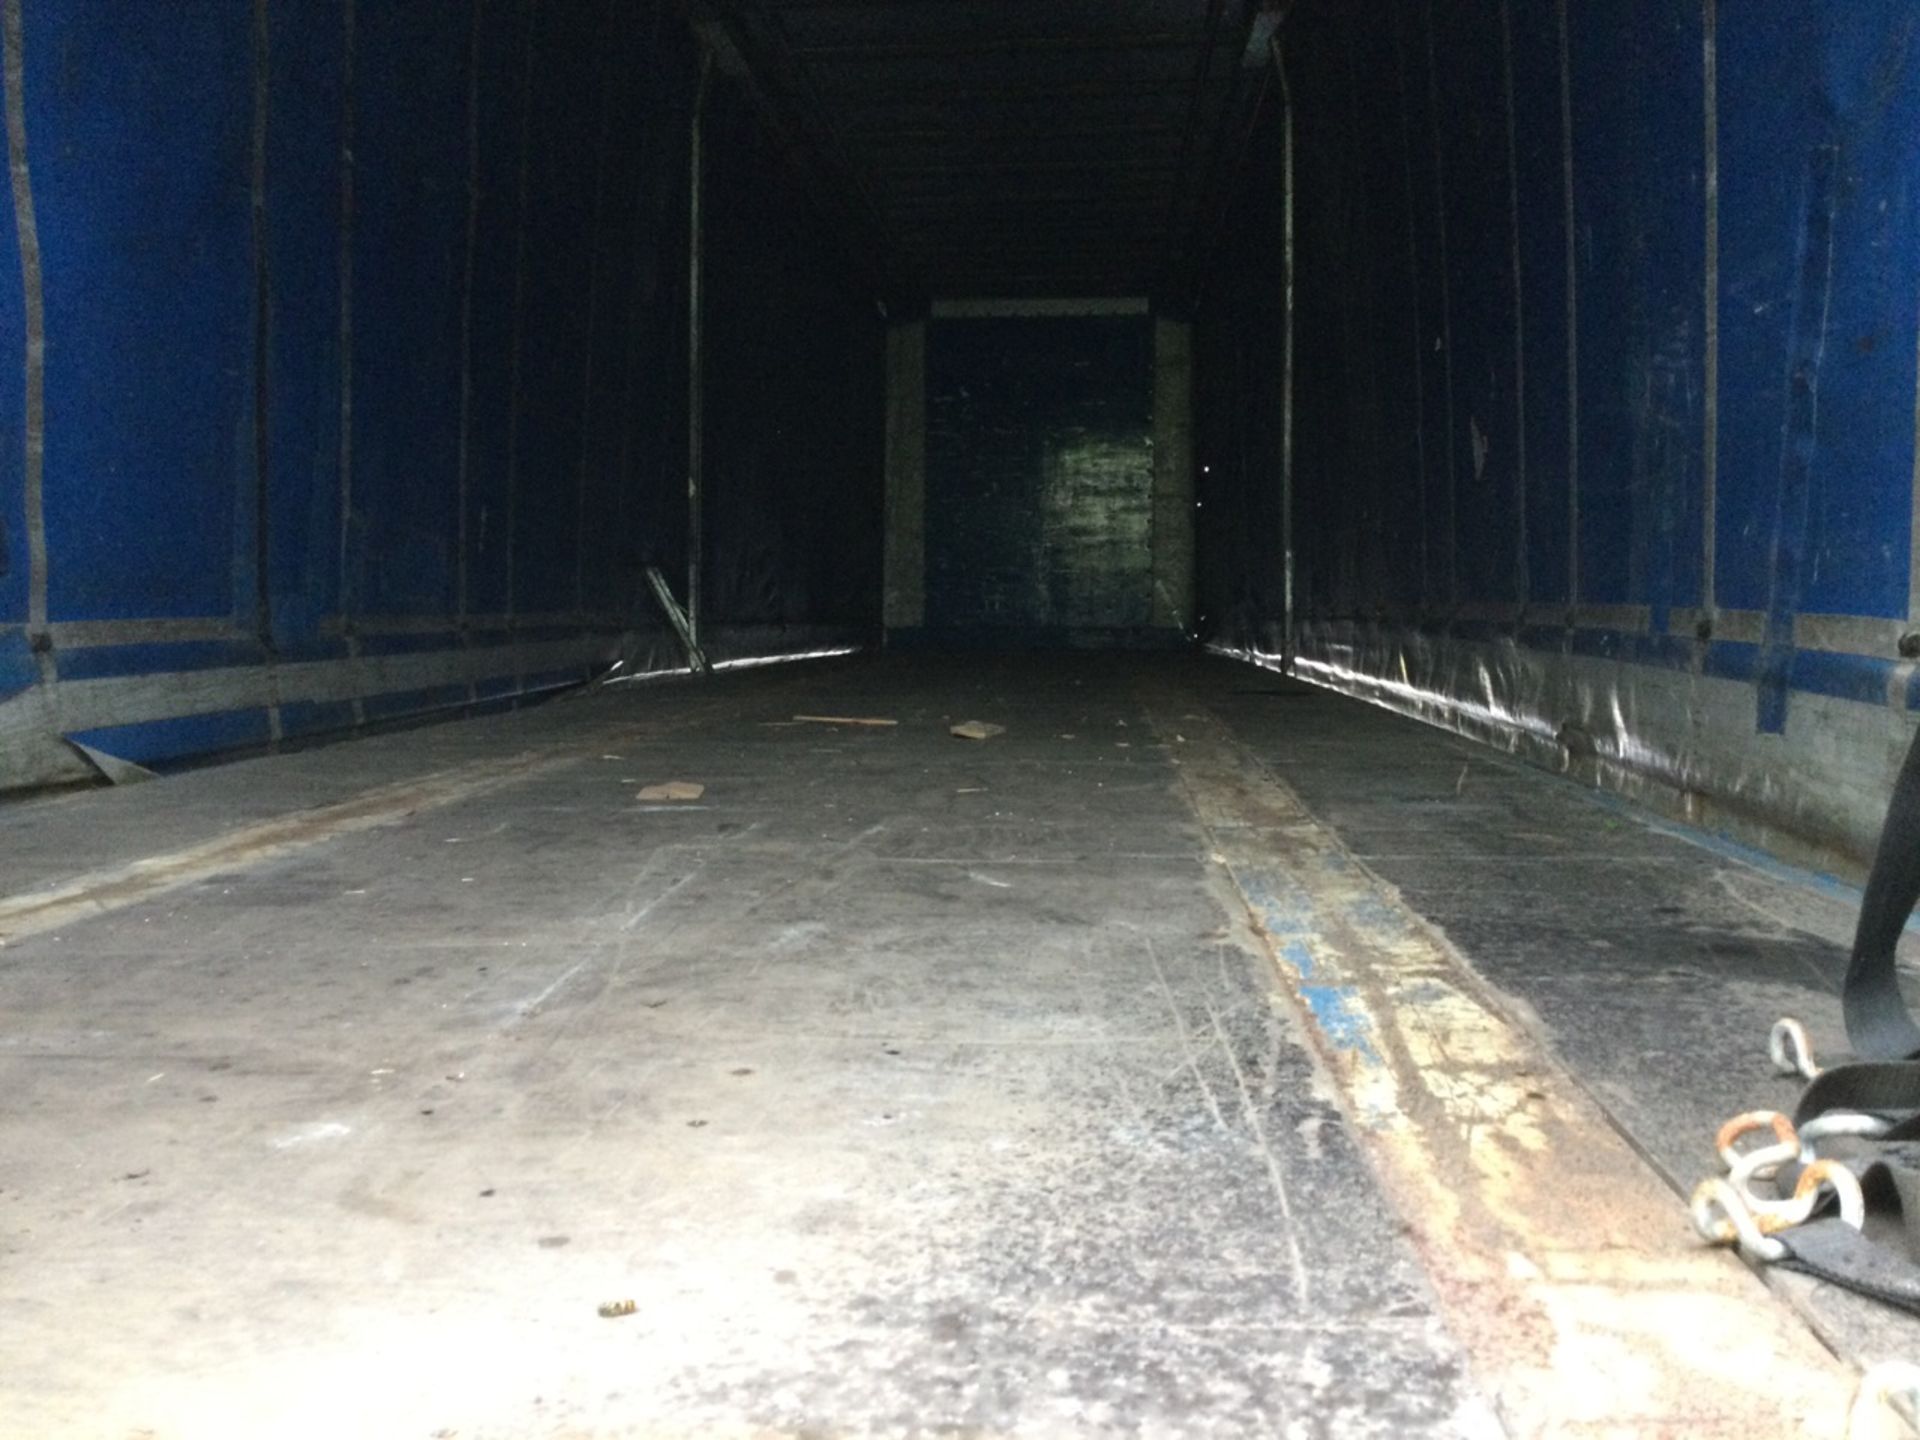 Montracon Tri-Axle 13.7m Curtainside Trailer With Air Suspension Mot Expired , serial number C14114 - Image 3 of 3